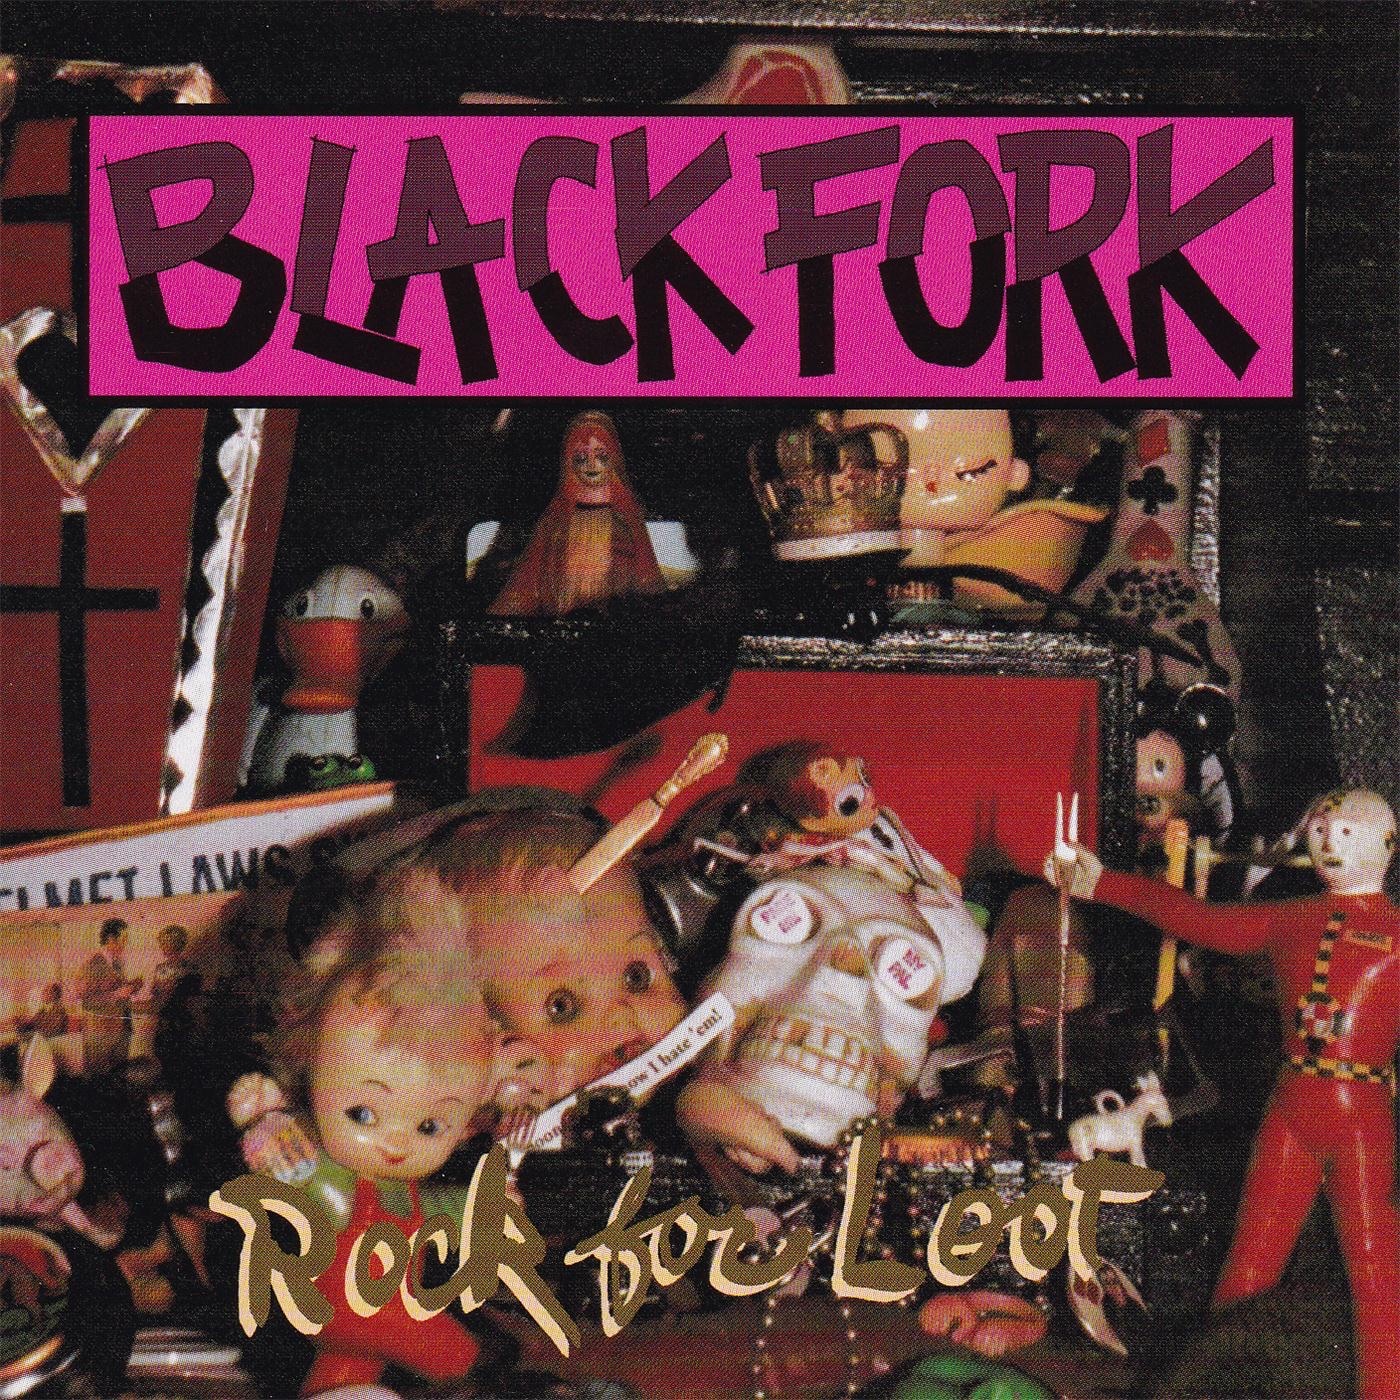 Rock For Loot by Black Fork